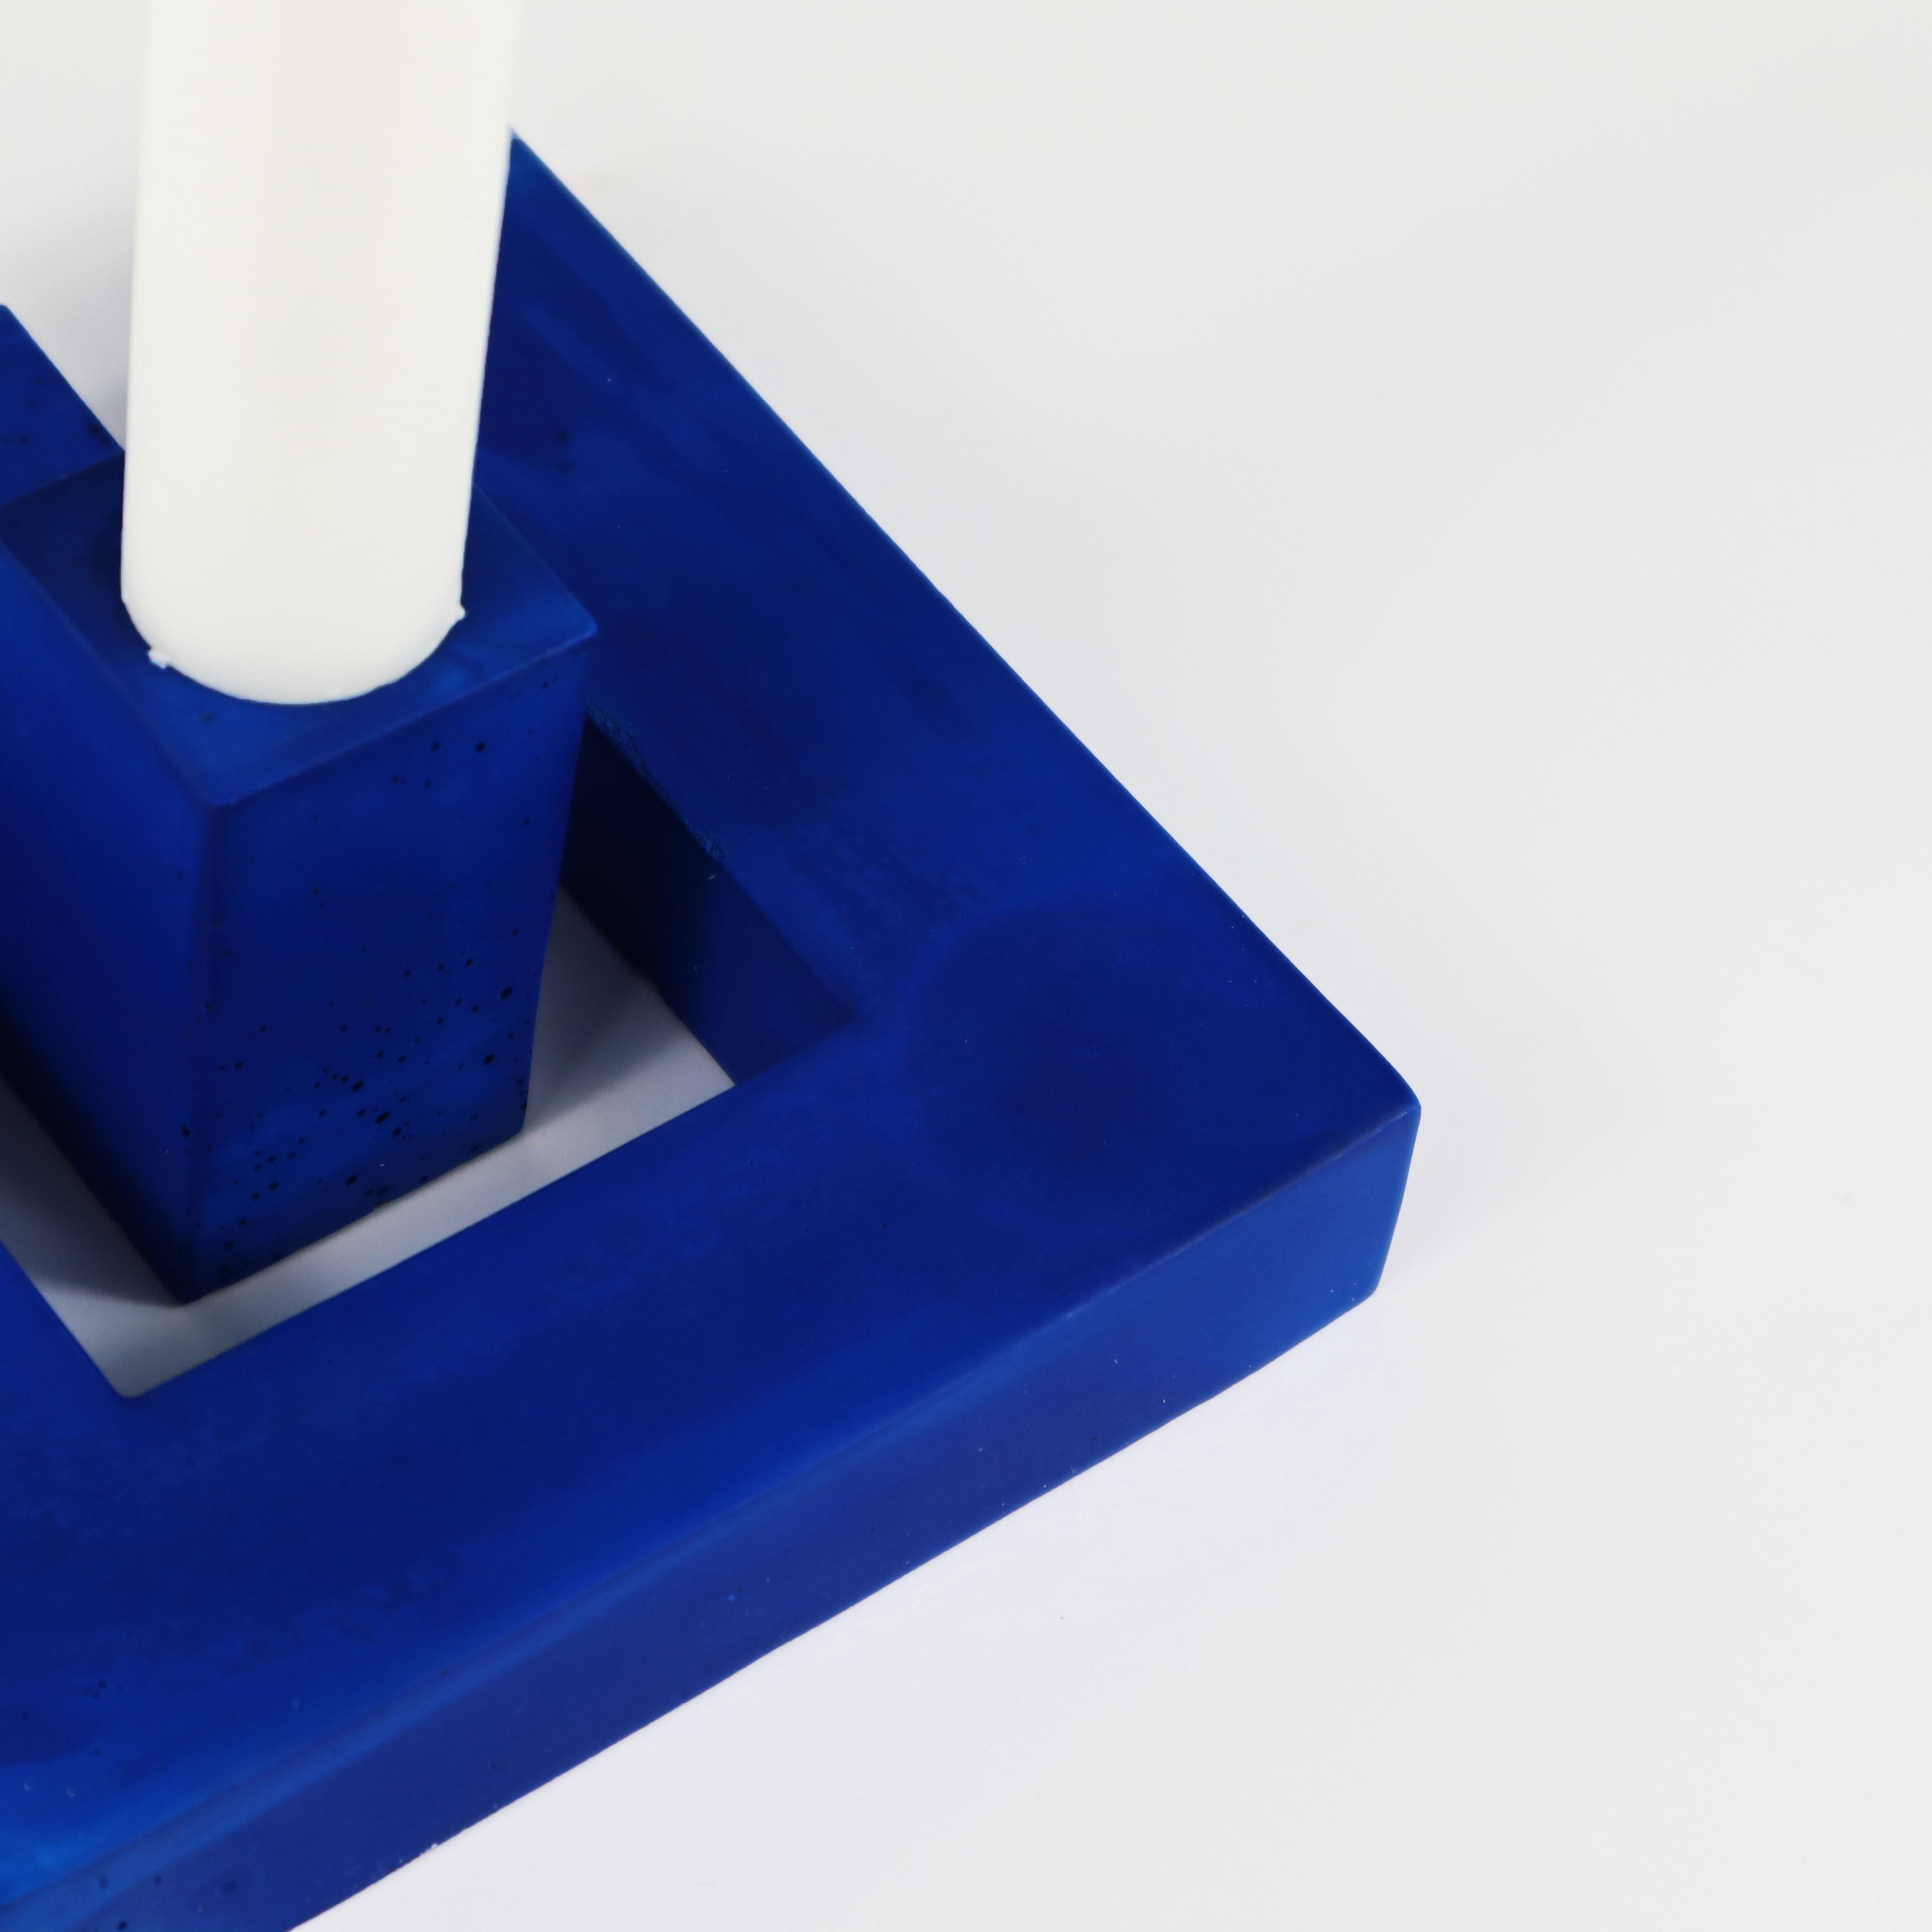 British Maze Royal Blue Cubist Early-20th-Century Avant-garde Style Taper Candle Holder